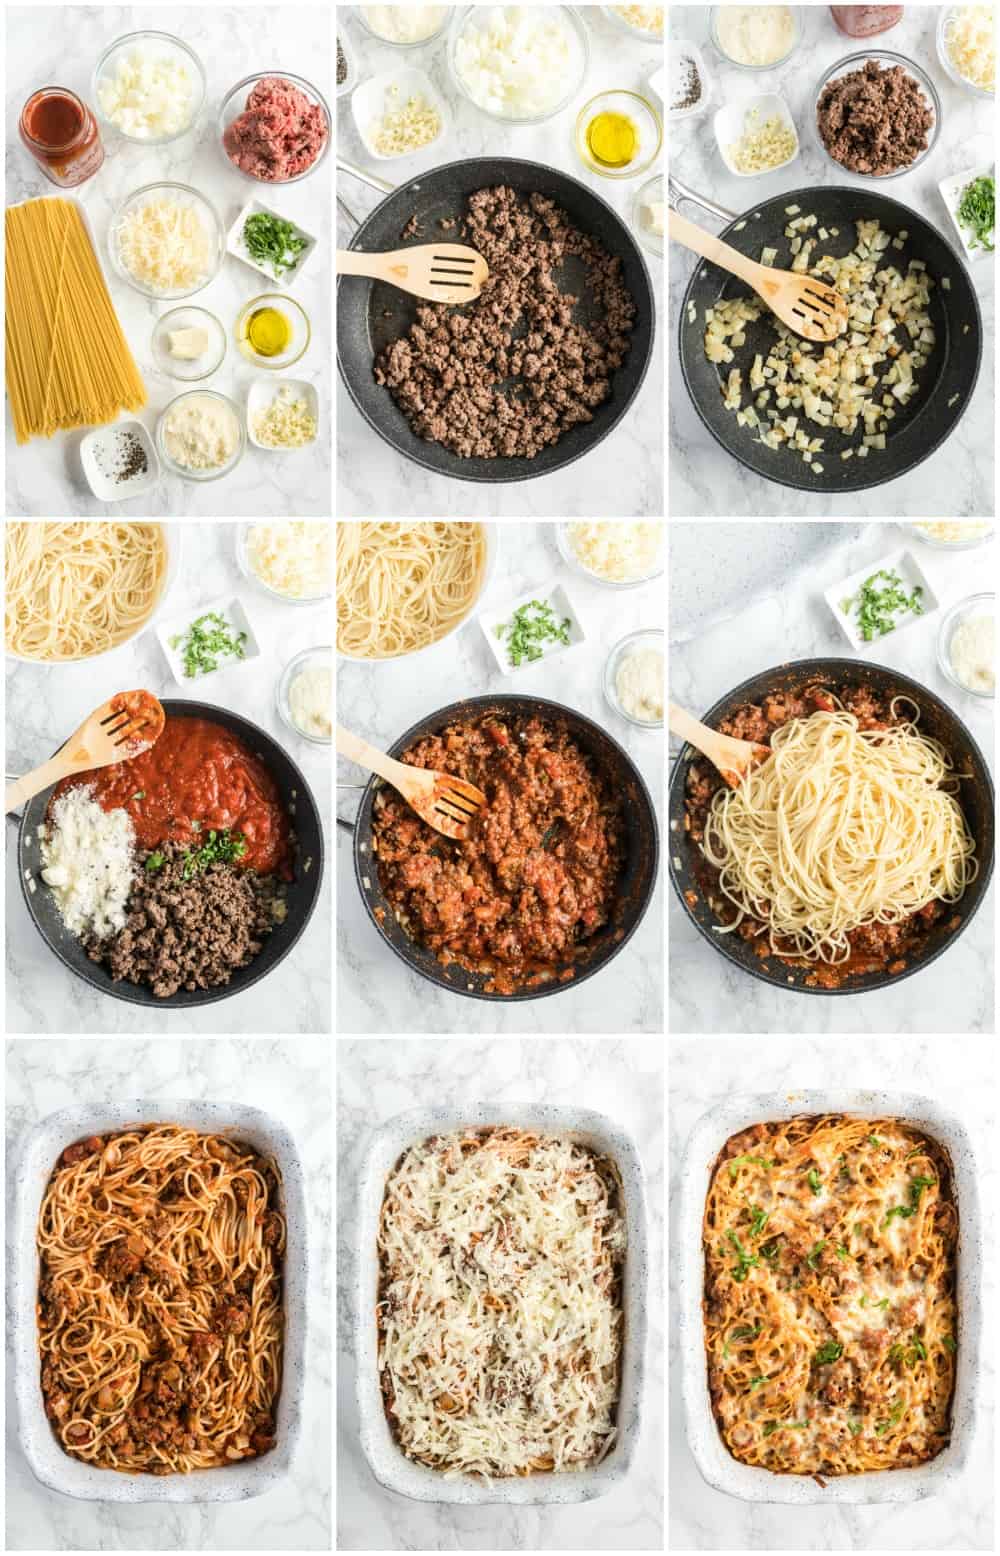 how to make baked spaghetti. step by step photos of making baked spaghetti